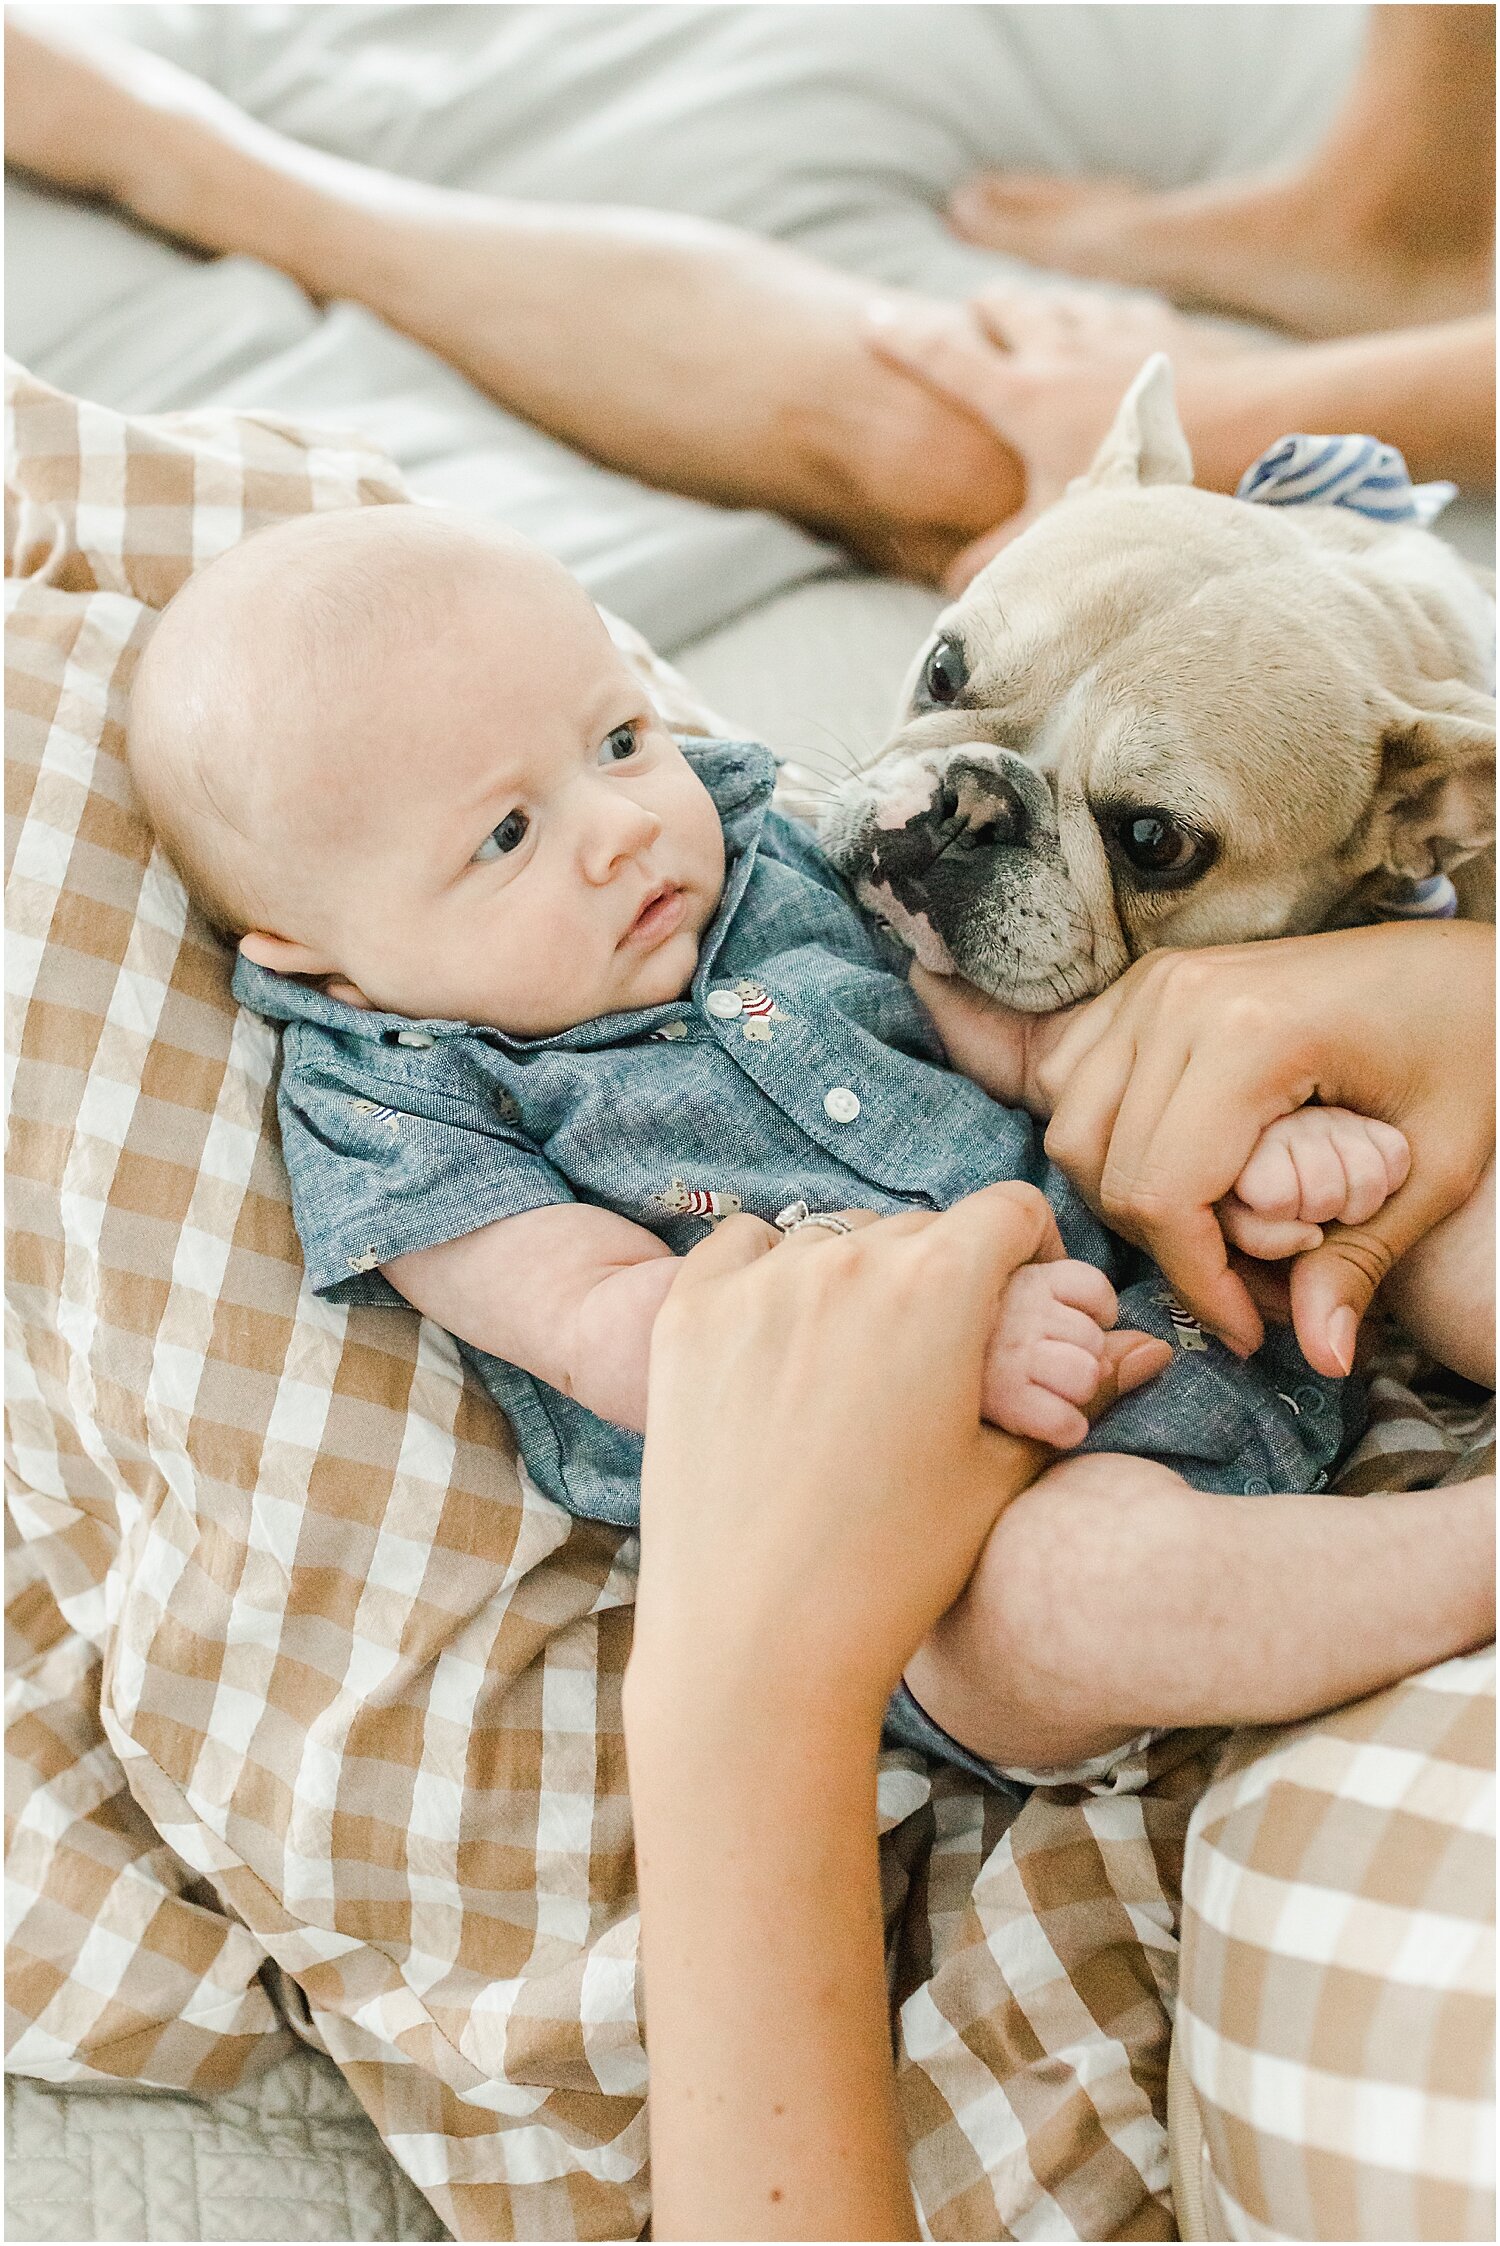 Lifestyle newborn session in New Canaan, CT. Photos by Kristin Wood Photography.